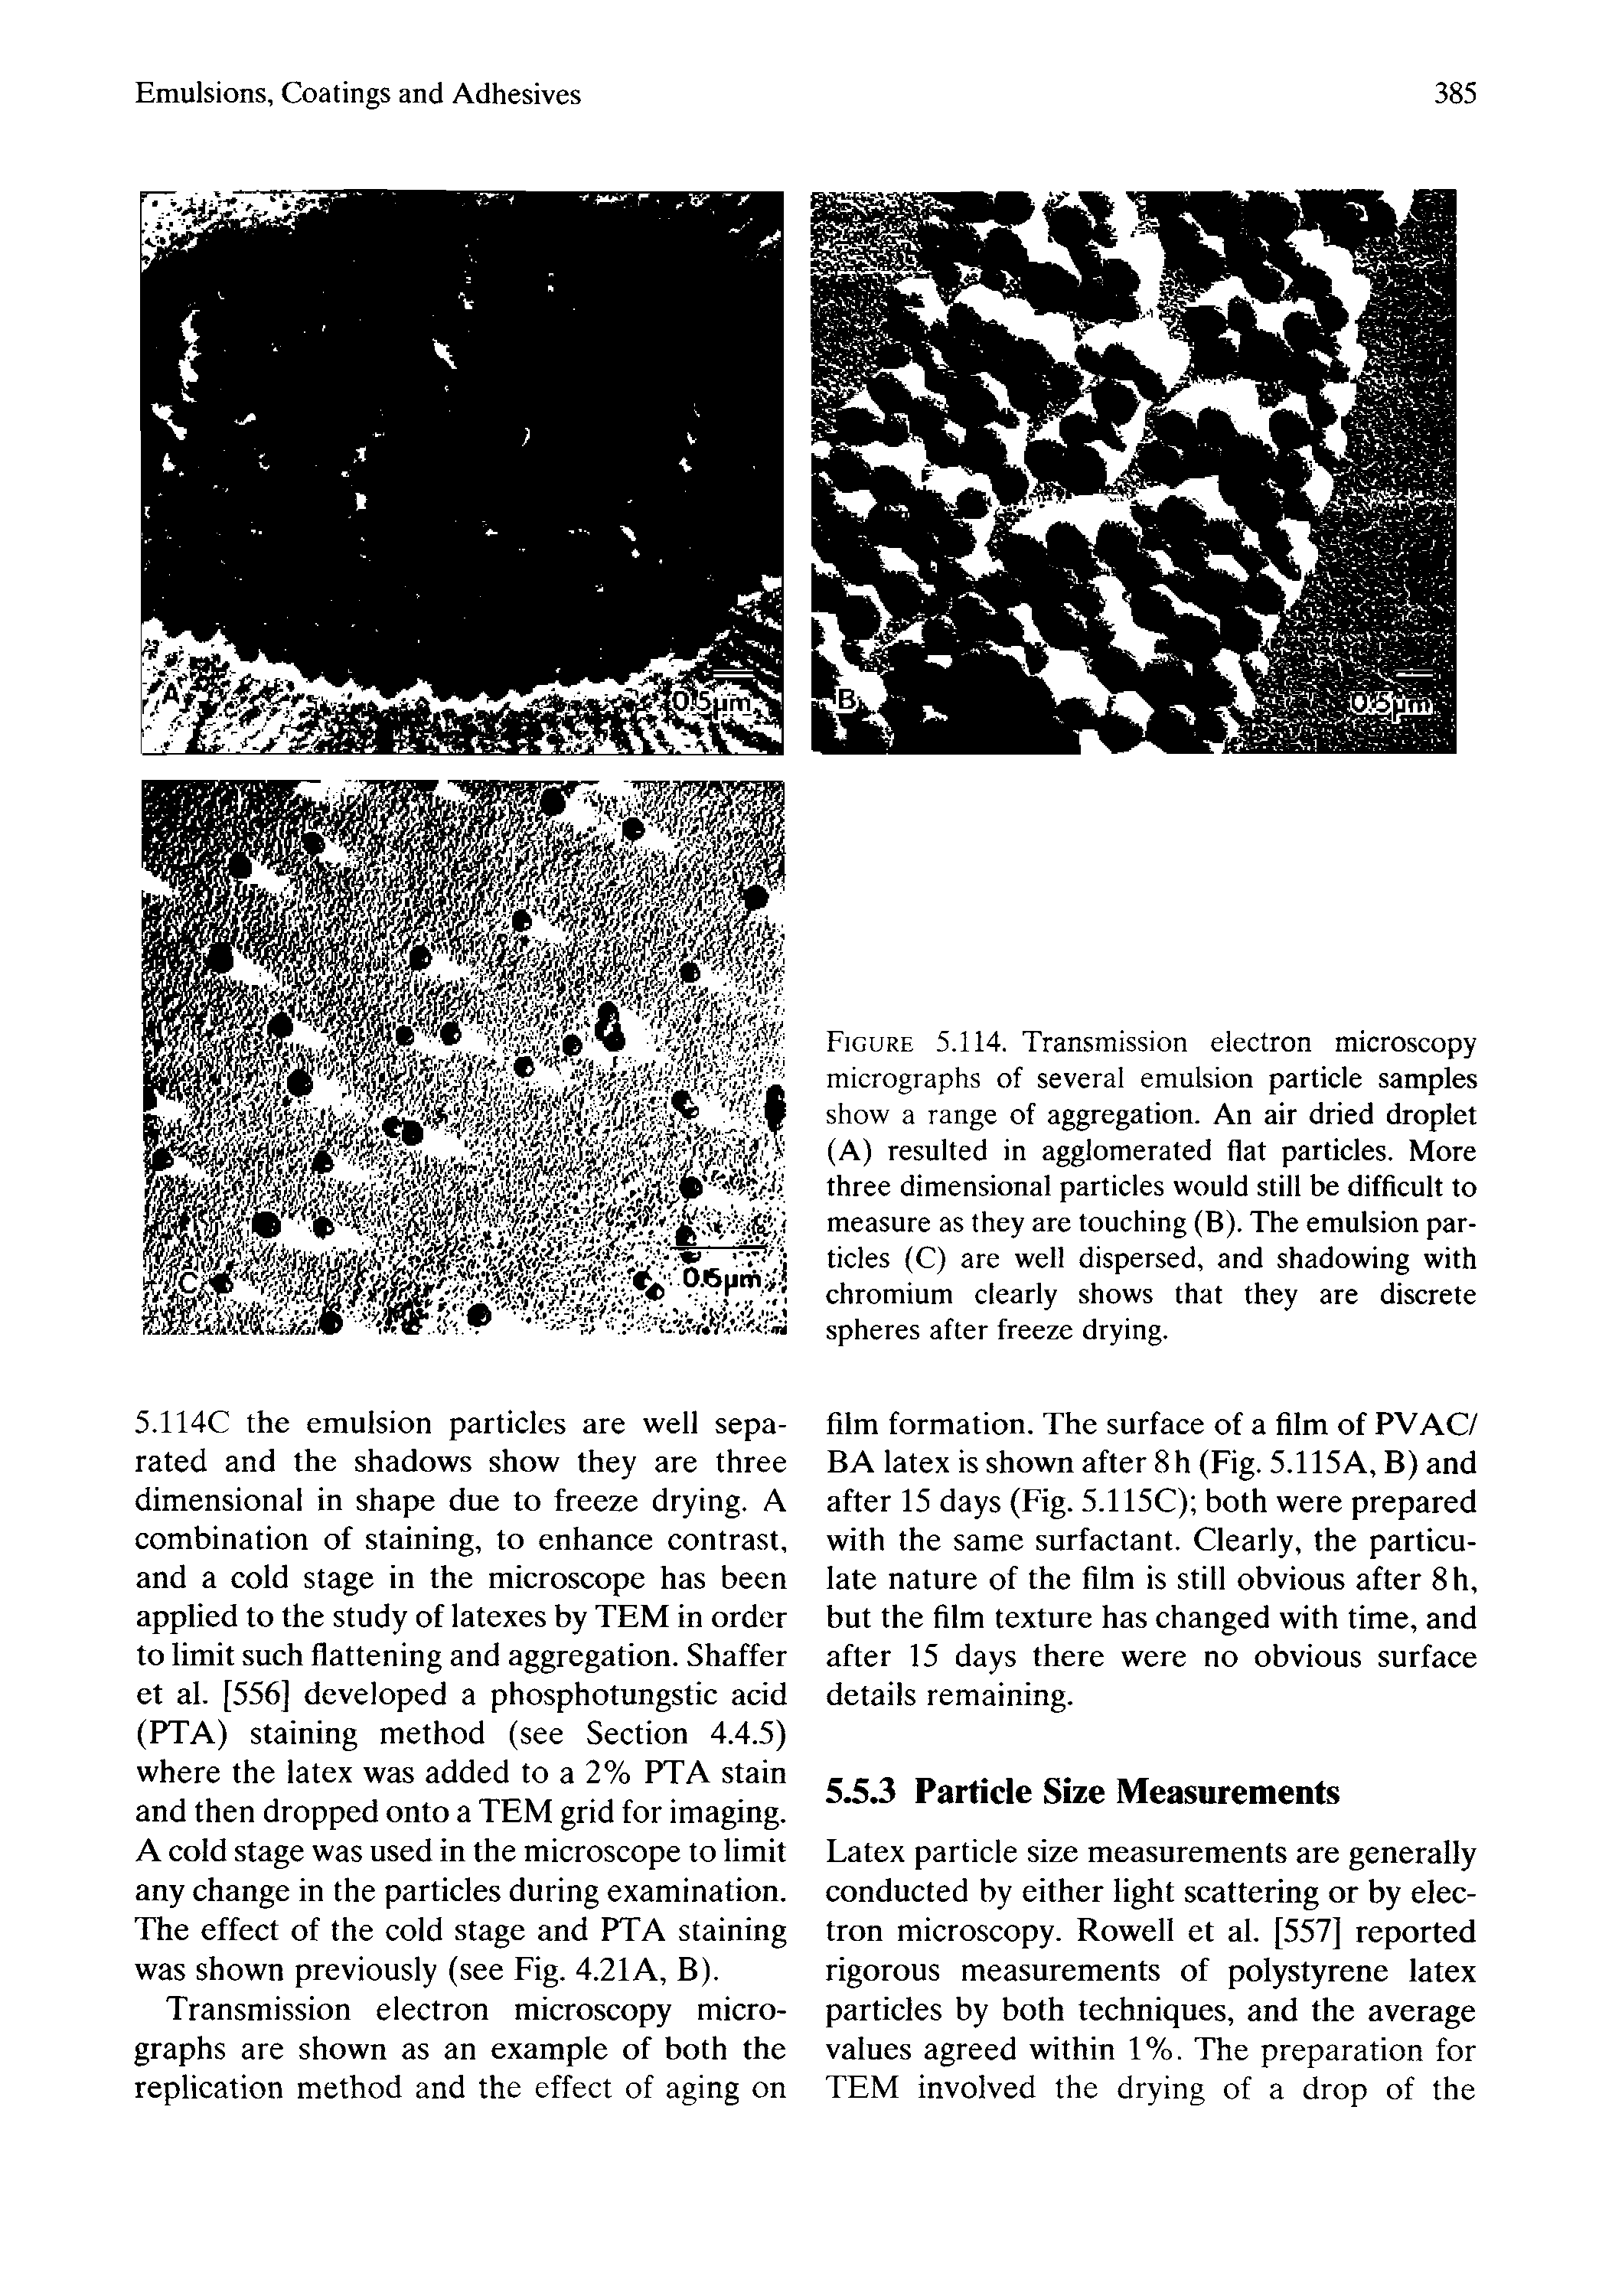 Figure 5.114. Transmission electron microscopy micrographs of several emulsion particle samples show a range of aggregation. An air dried droplet (A) resulted in agglomerated flat particles. More three dimensional particles would still be difficult to measure as they are touching (B). The emulsion particles (C) are well dispersed, and shadowing with chromium clearly shows that they are discrete spheres after freeze drying.